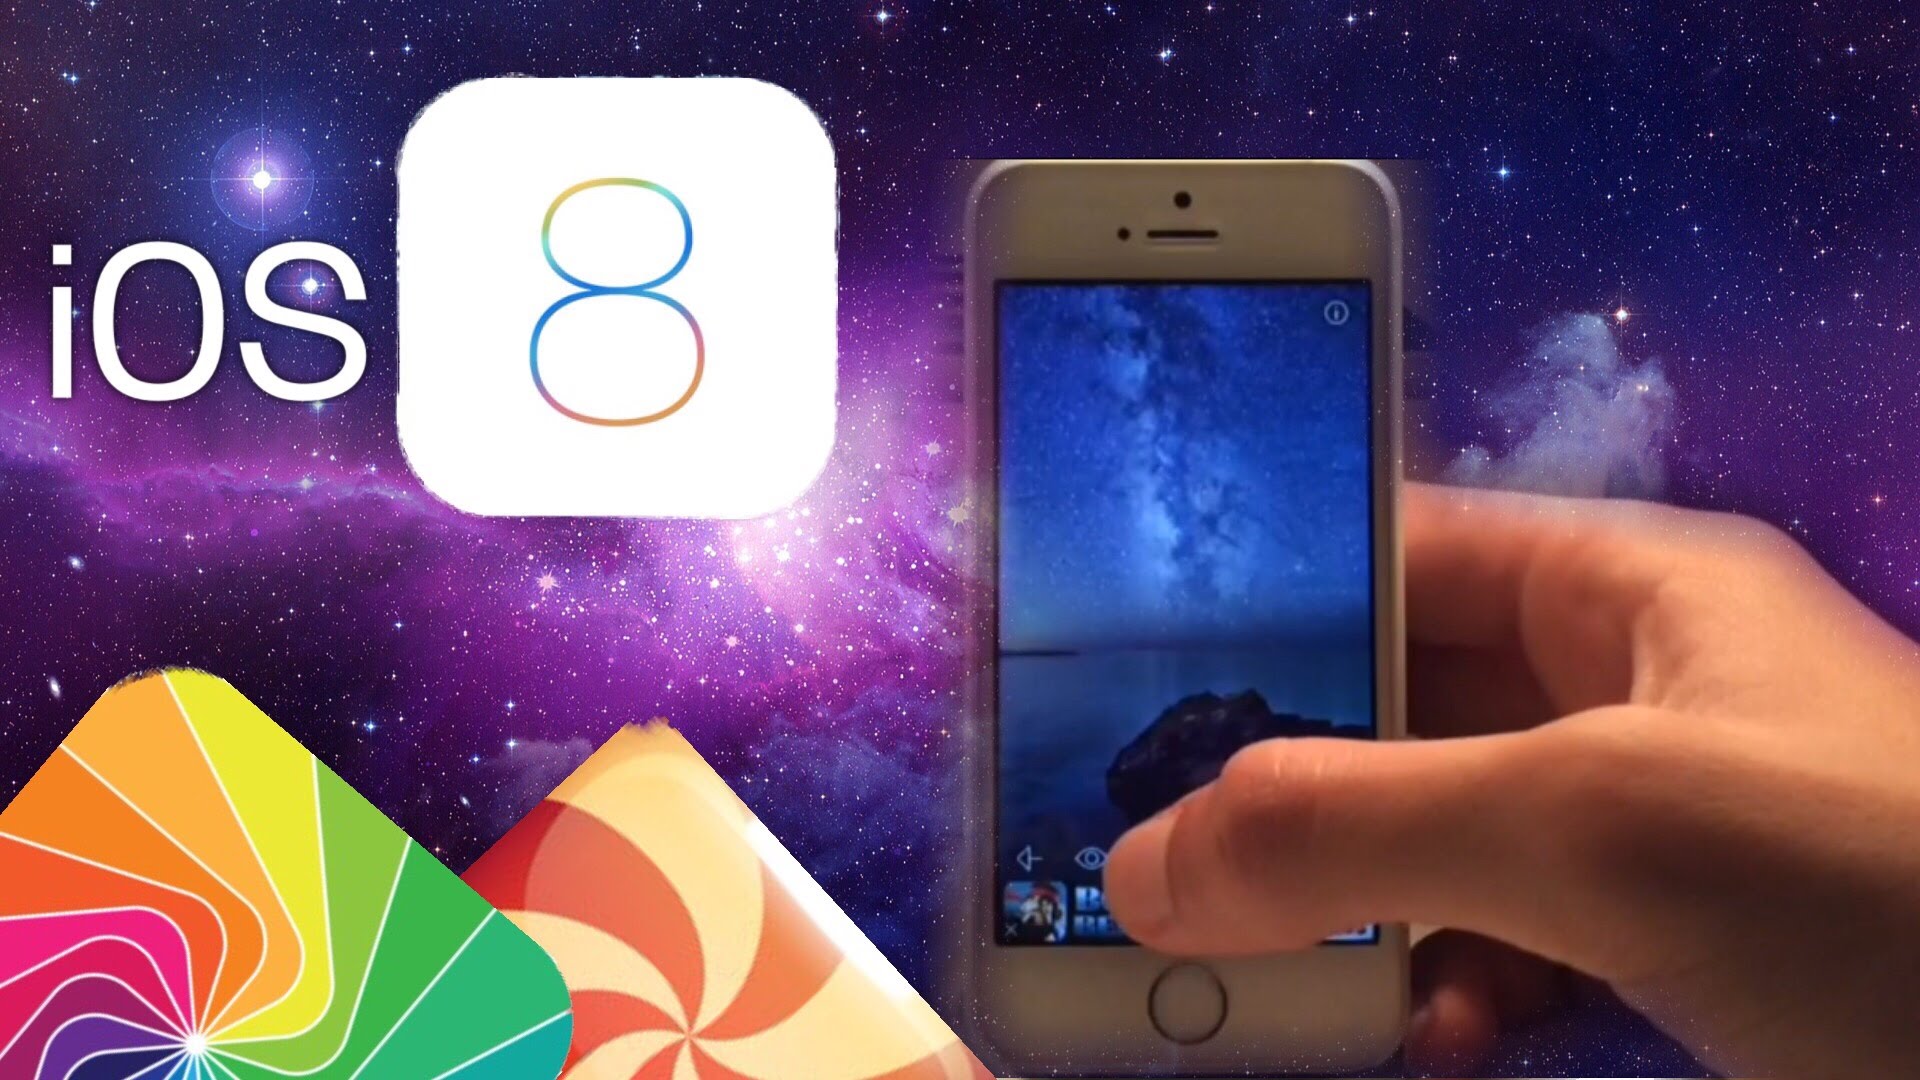 Wallpaper Apps For IOS 8 [1920x1080